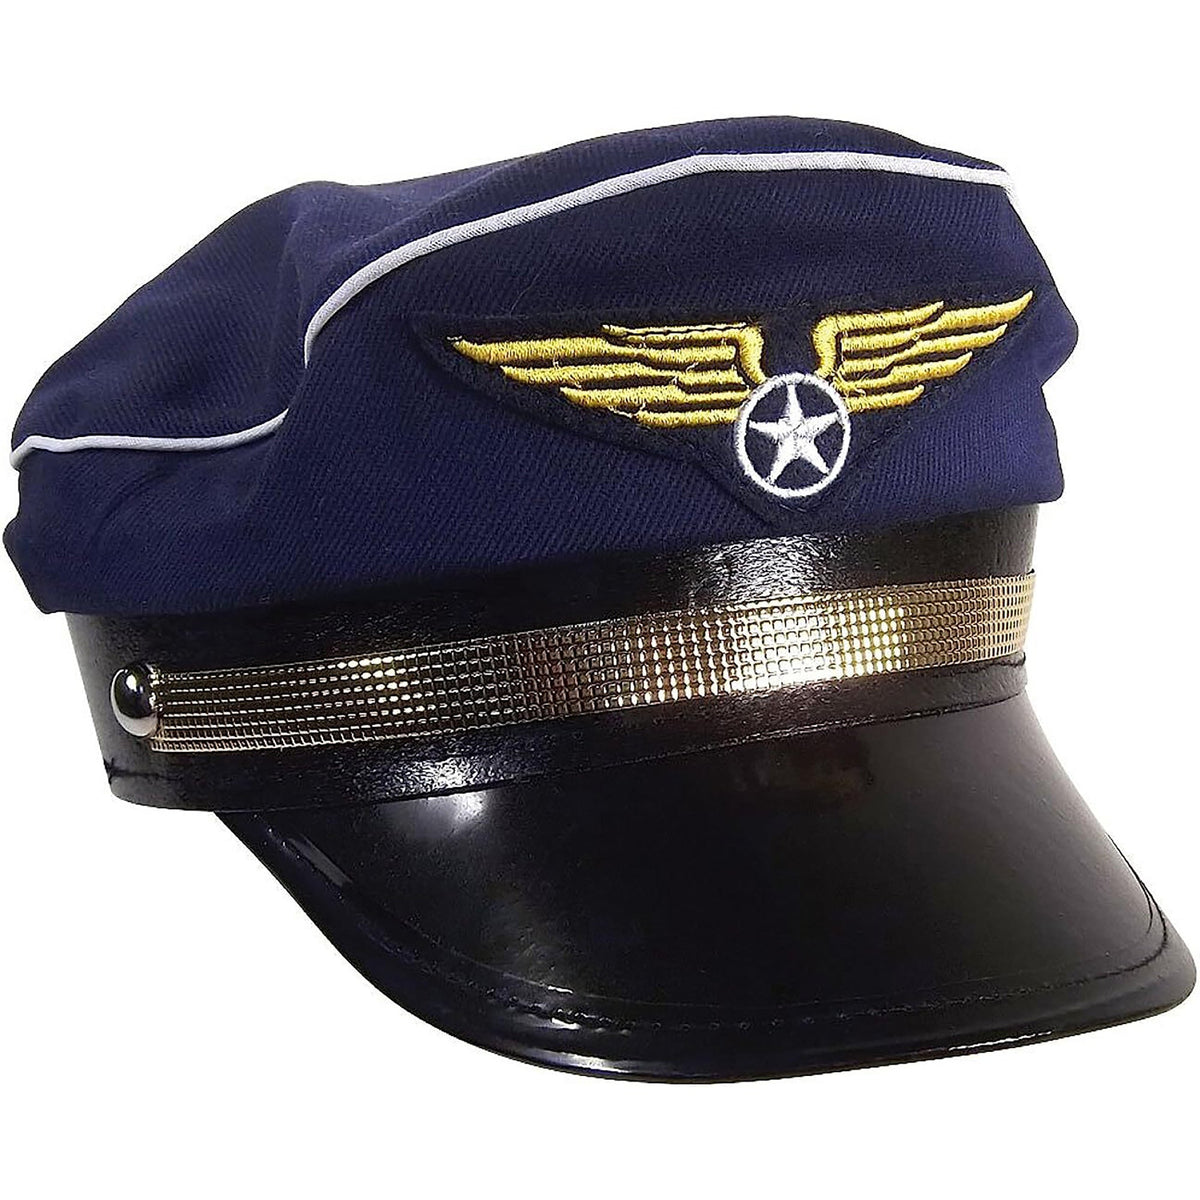 JACOBSON HAT CO INC Costume Accessories Navy Pilot Cap for adults 763285774881